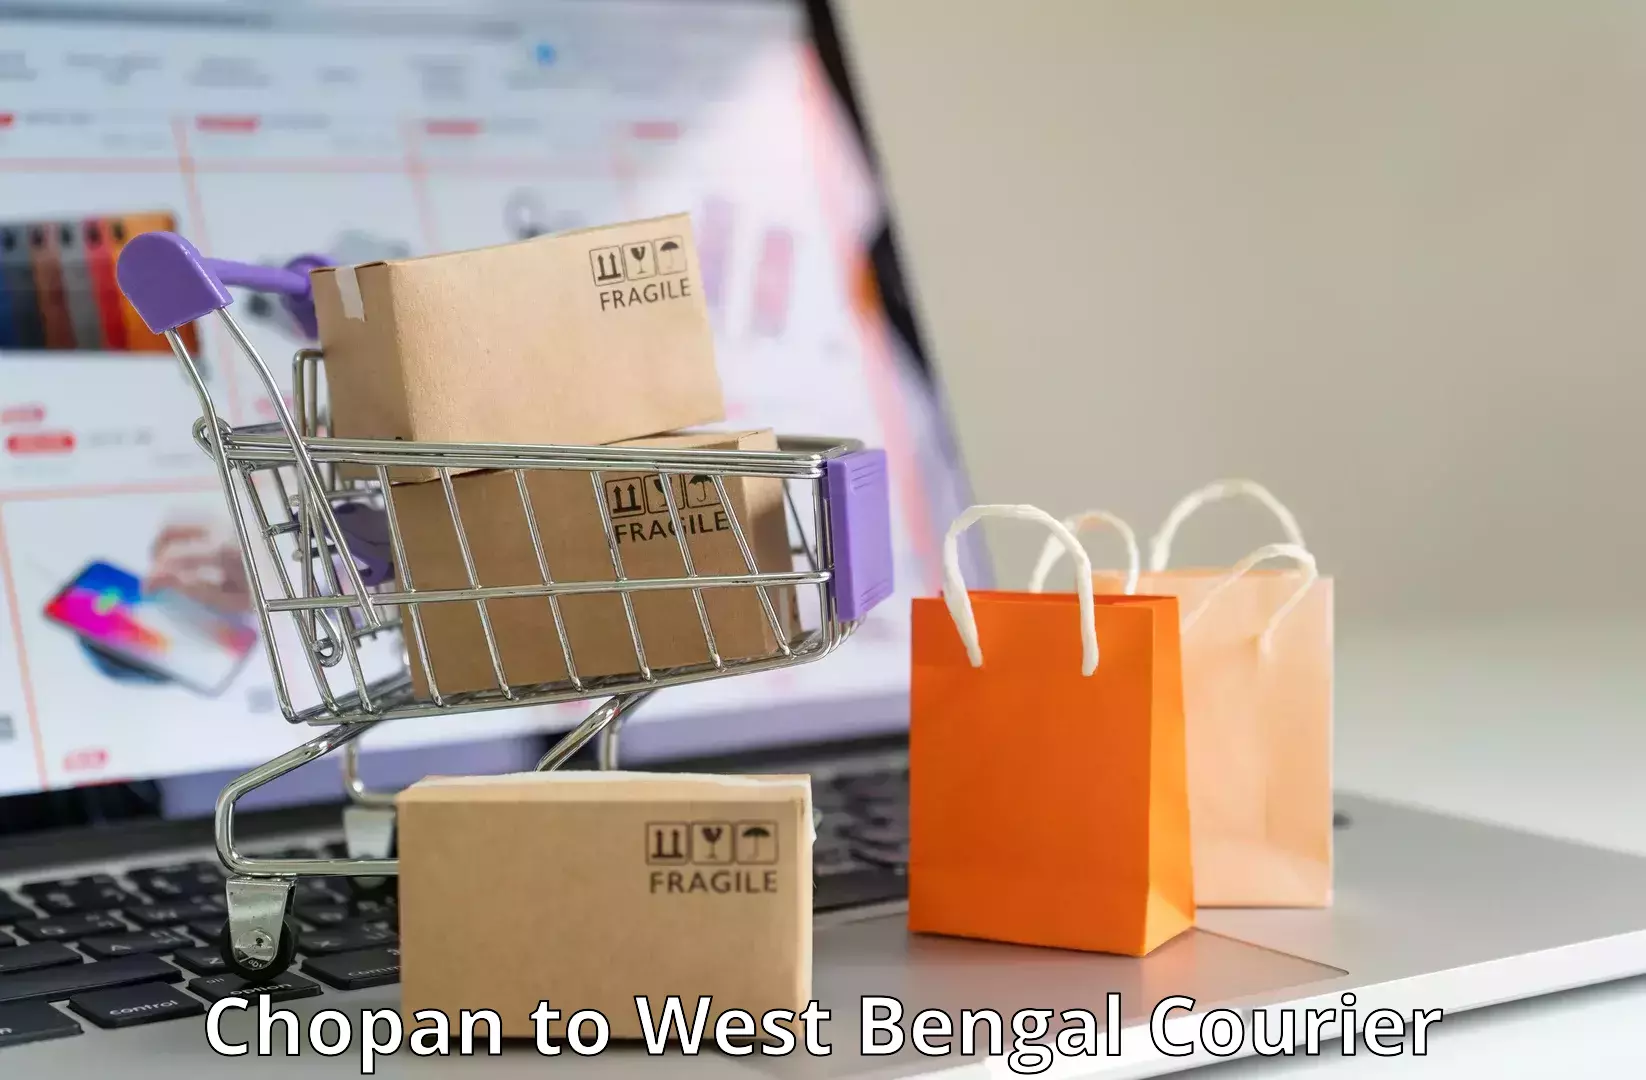 Full-service courier options Chopan to Islampur